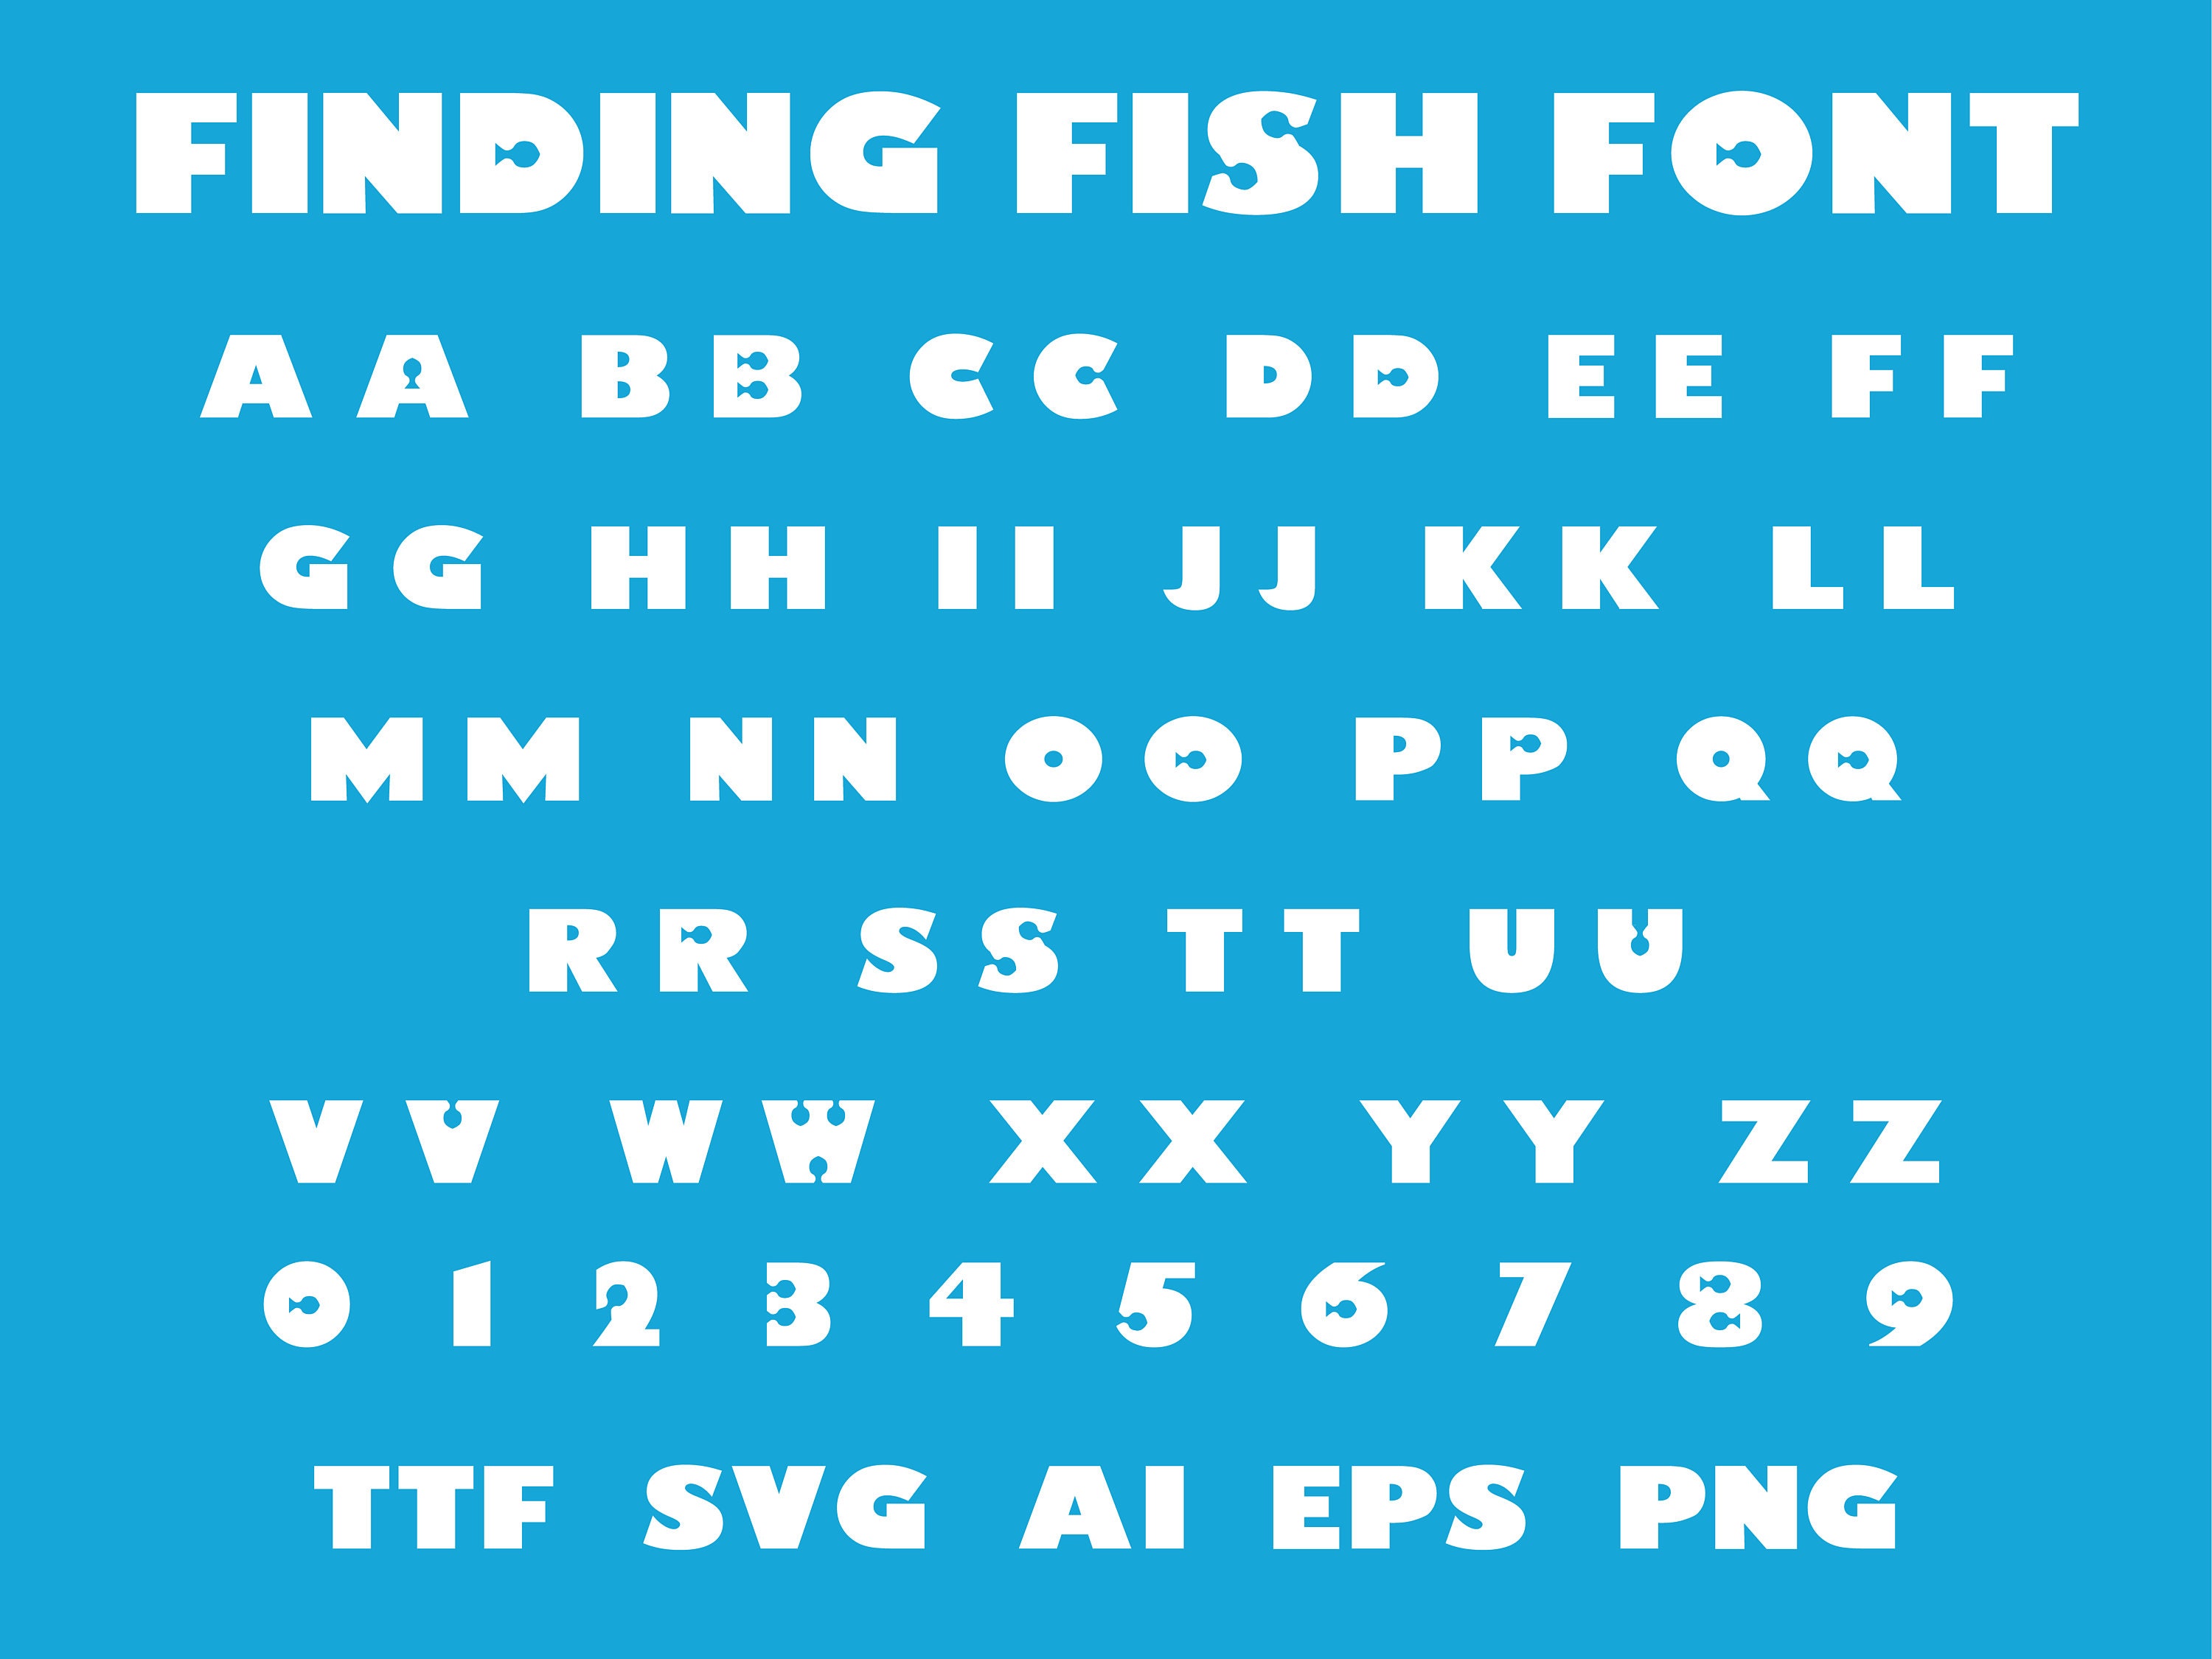 Finding Fish Font Ttf Svg Eps Png Cricut Silhouette Word Crafting 